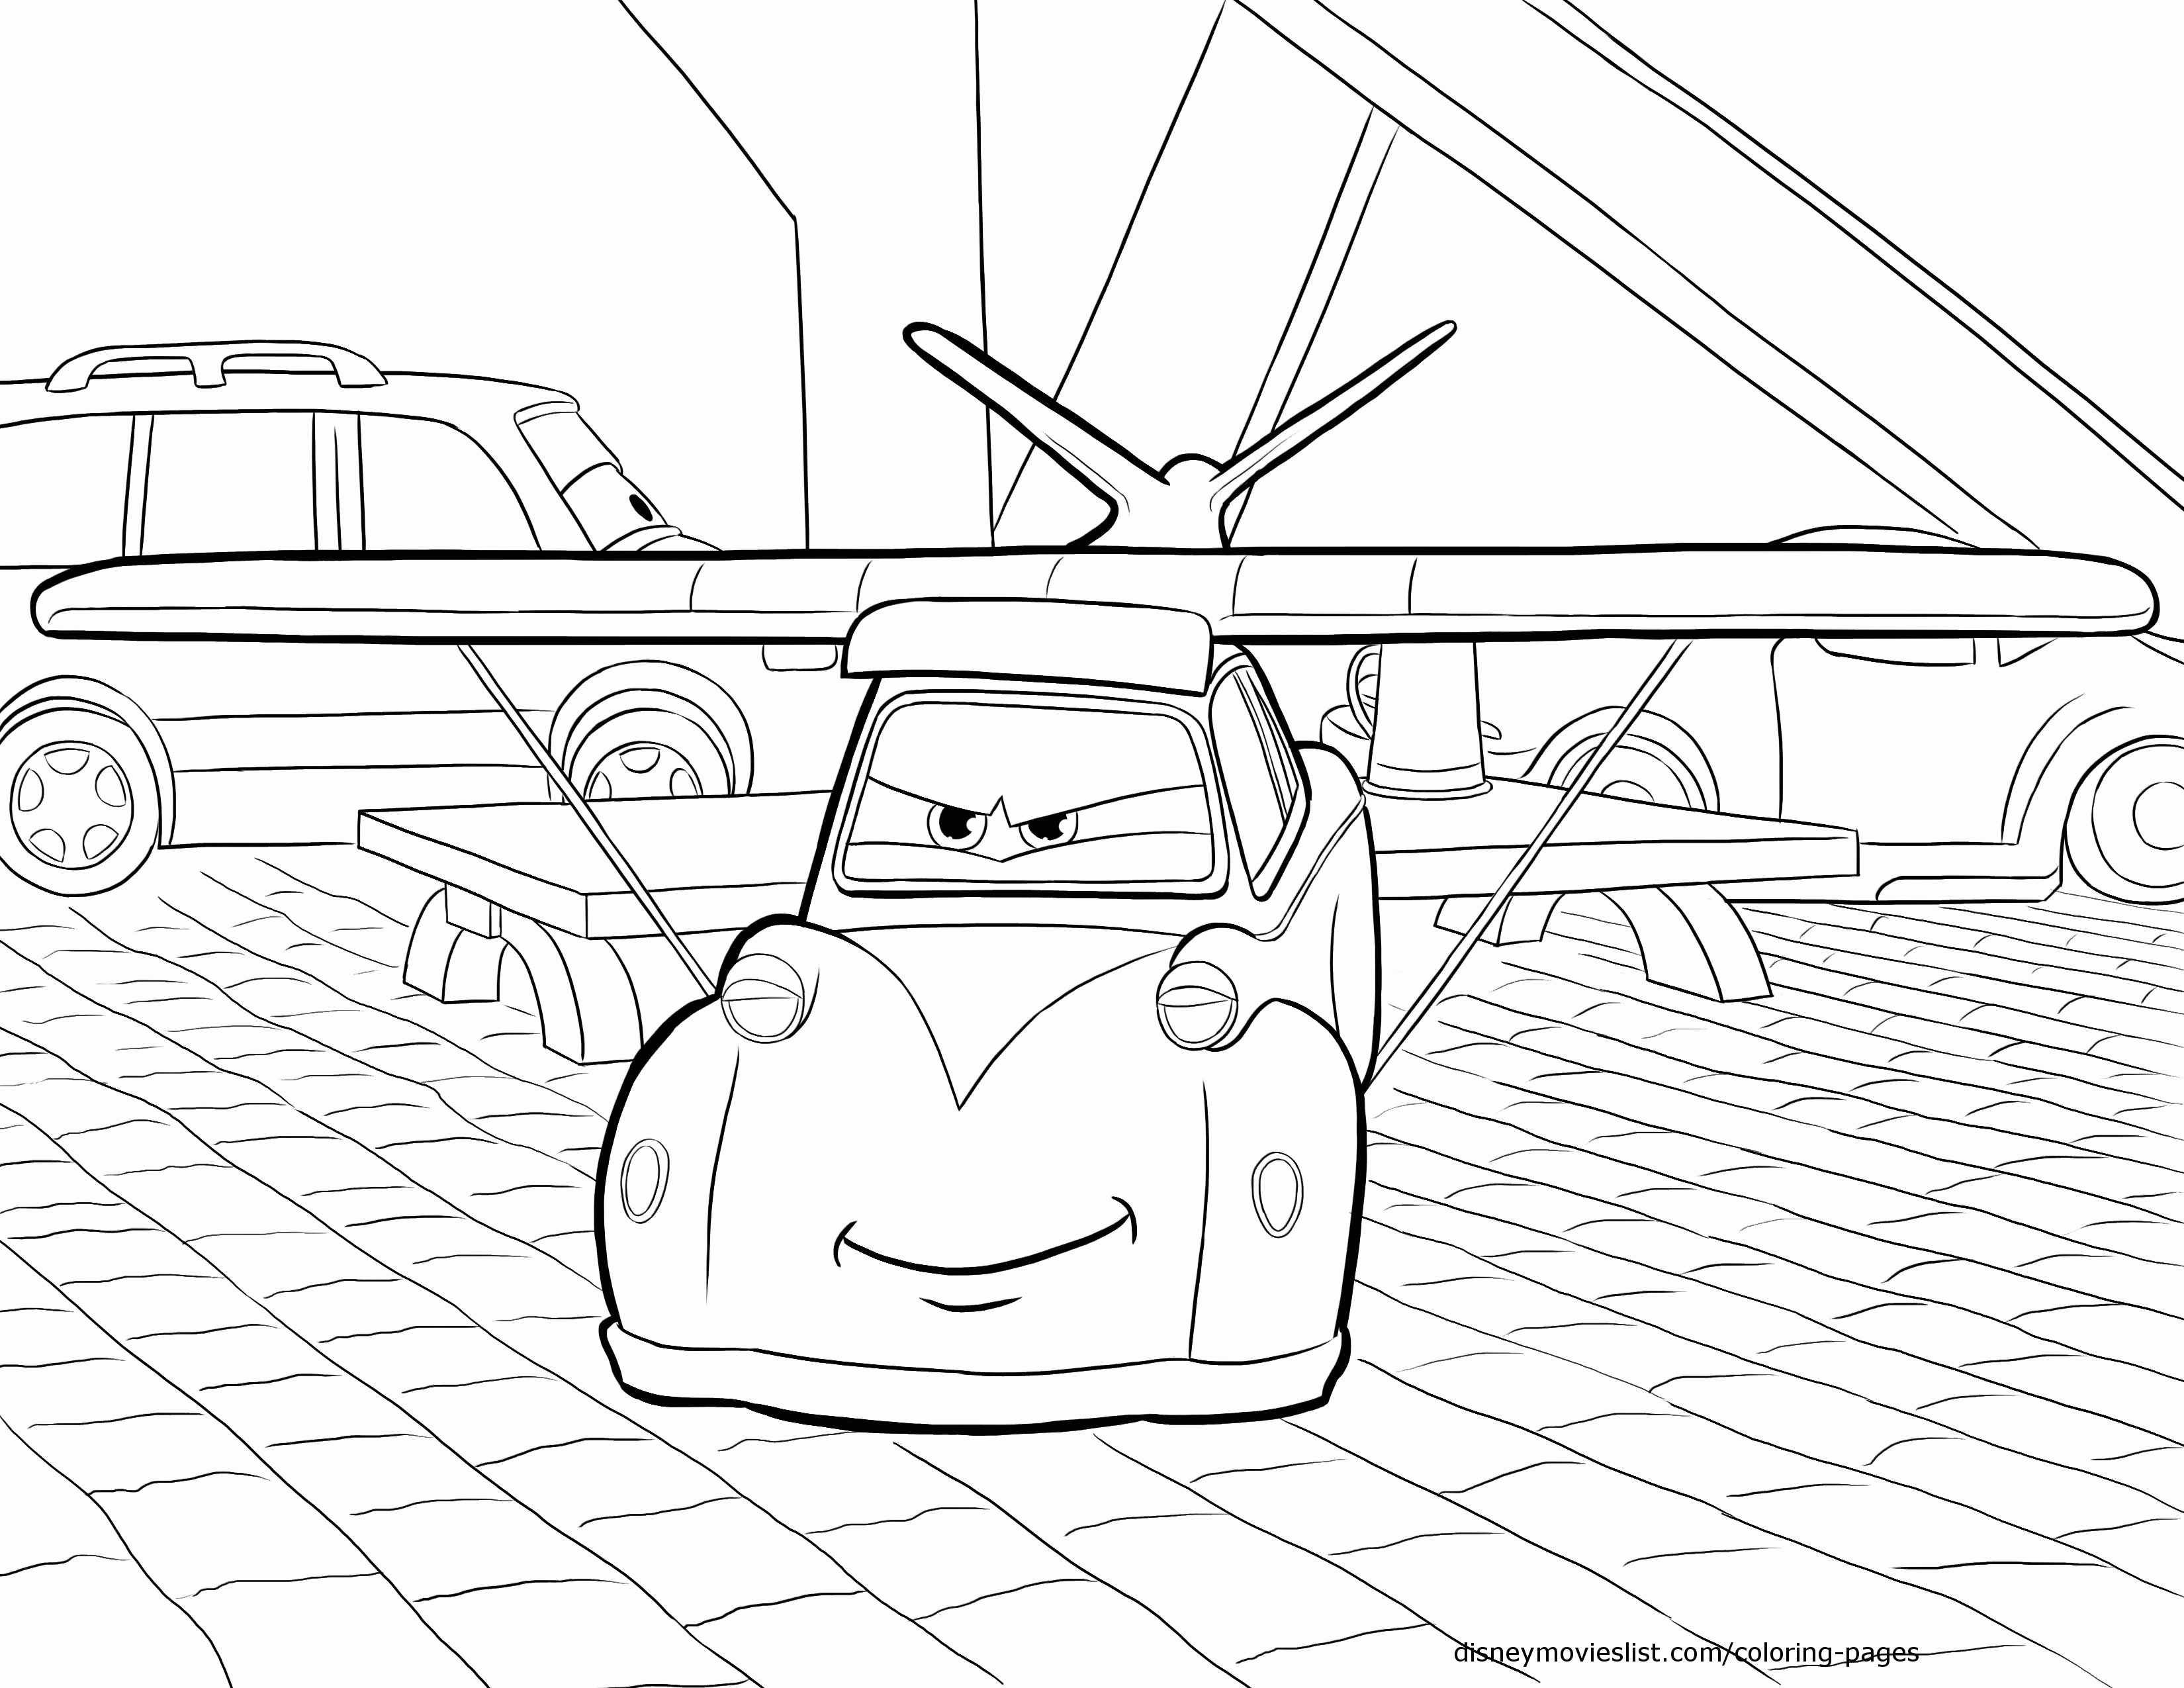 biplane coloring page coloring page transportation coloring pages ...